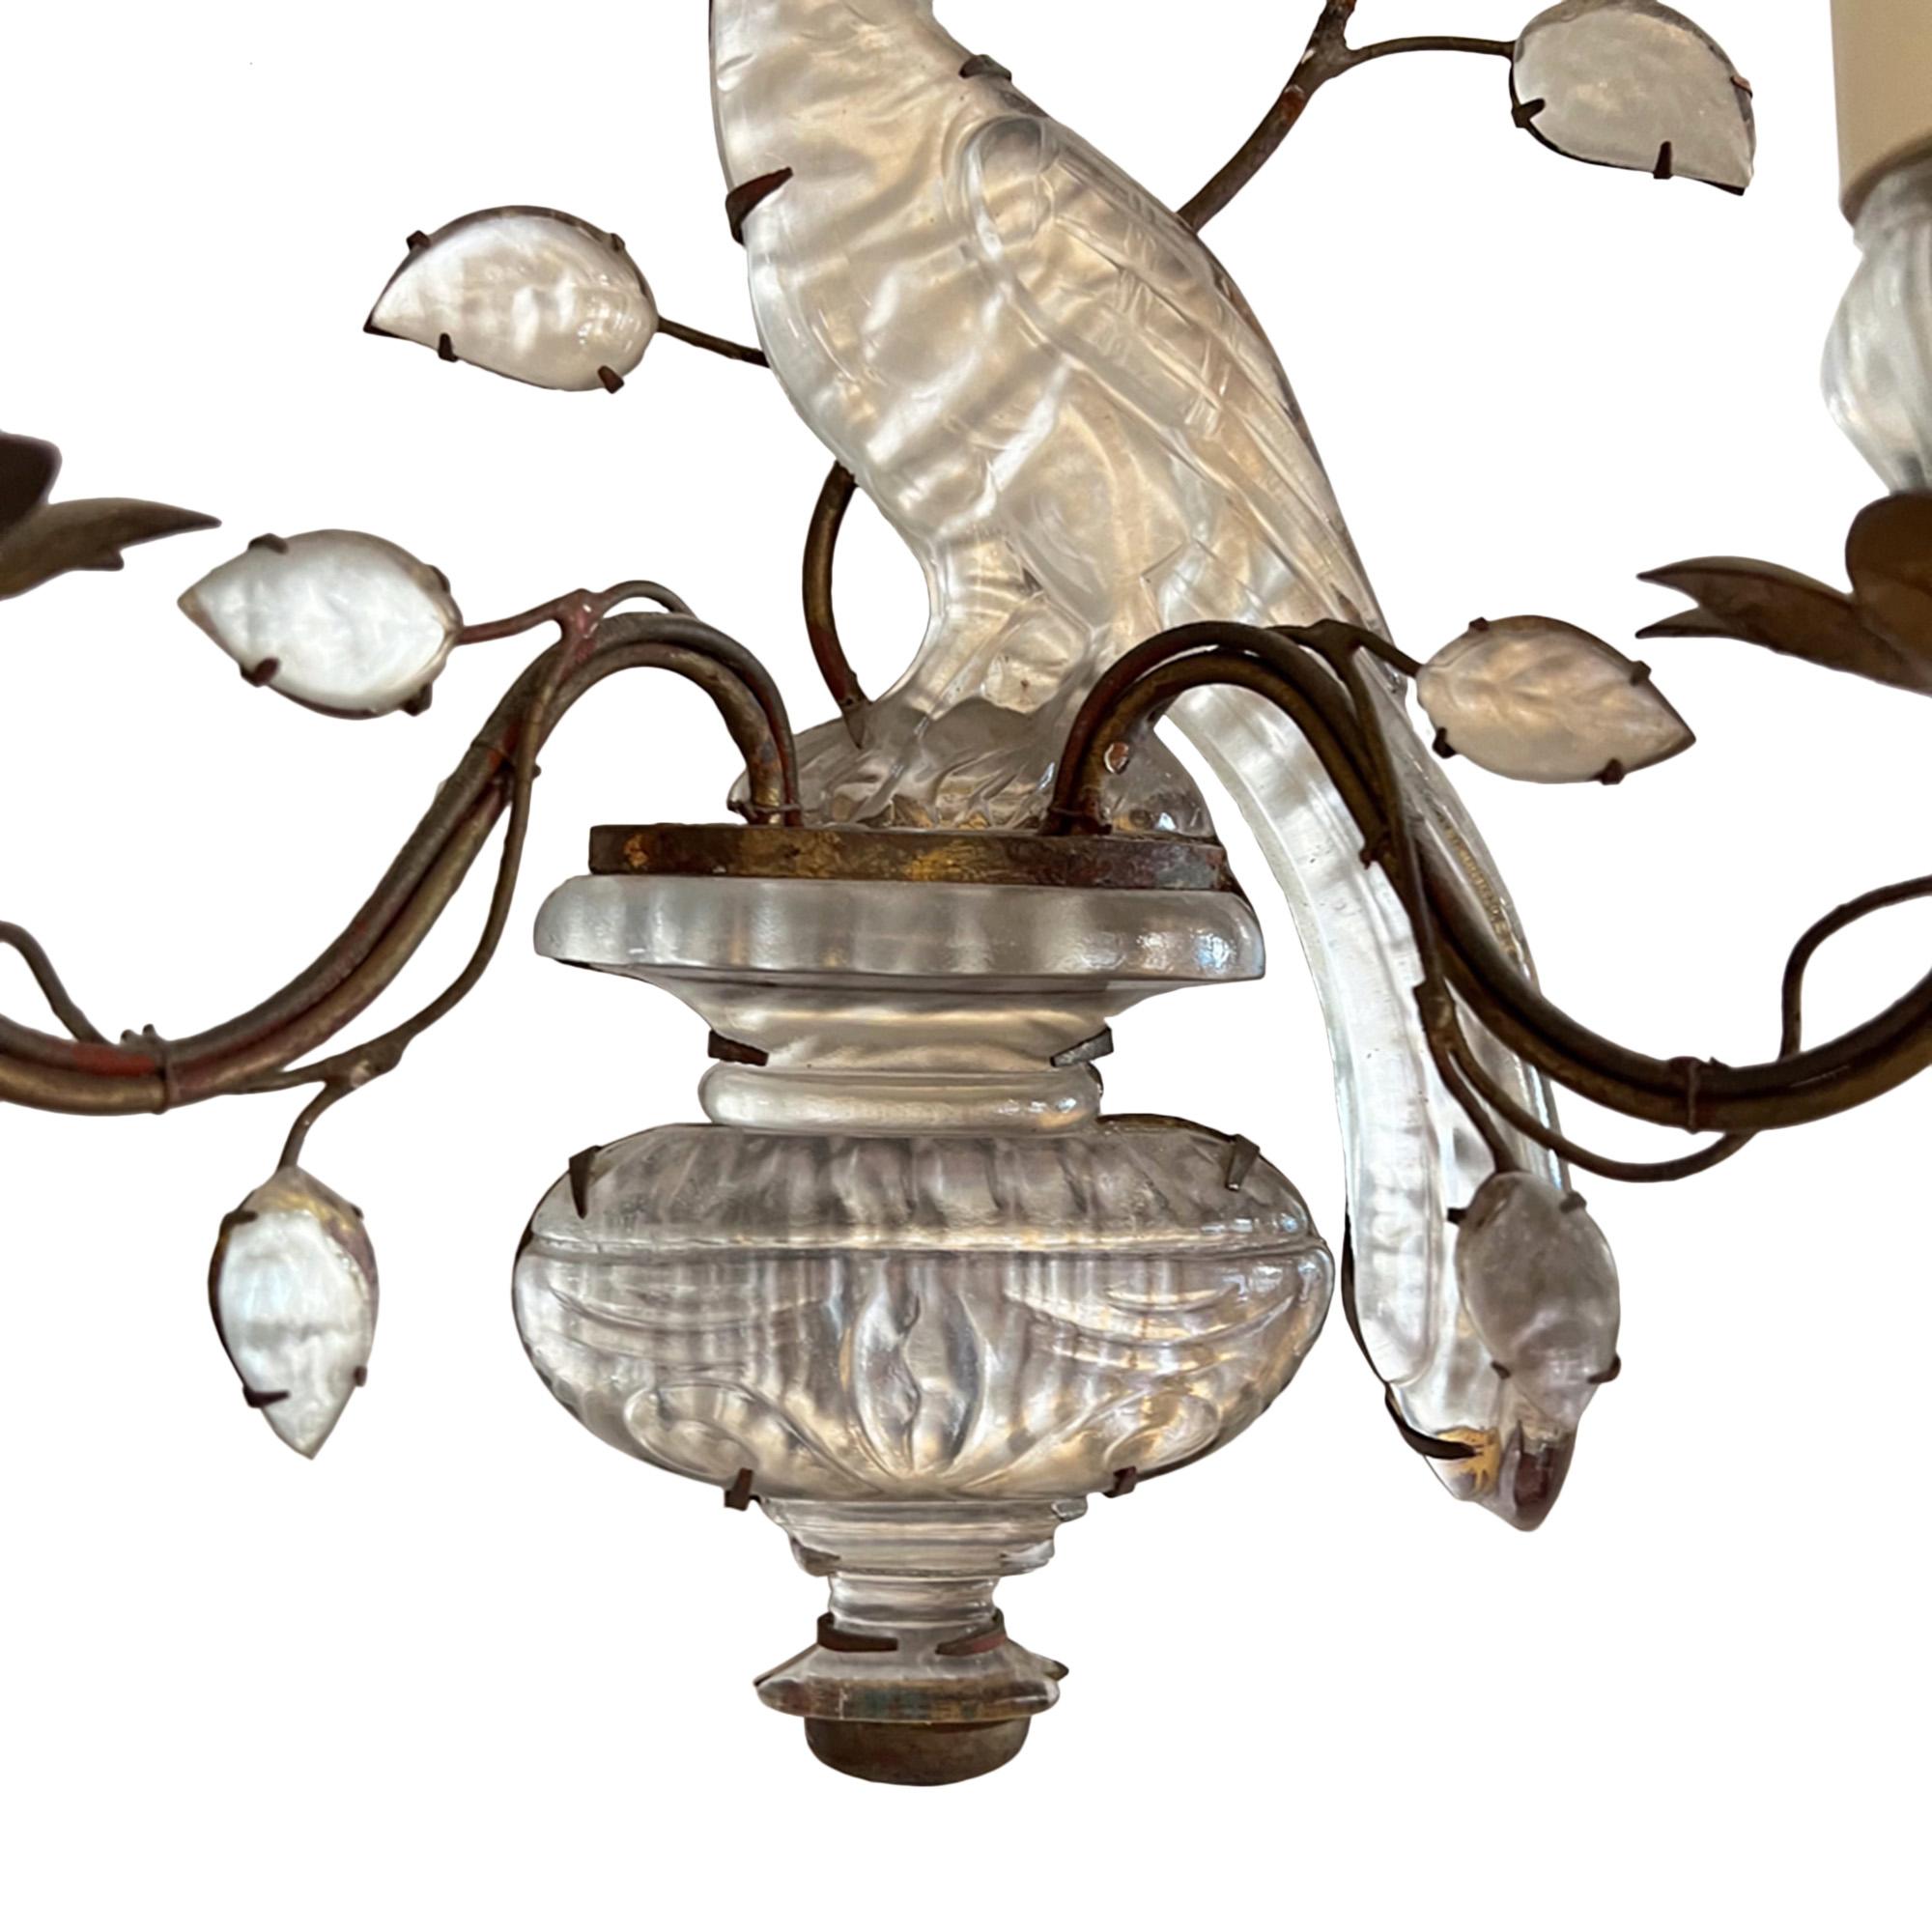 Mid-20th Century A Near Pair of Maison Baguès Wall Sconces With Urns and Parrots